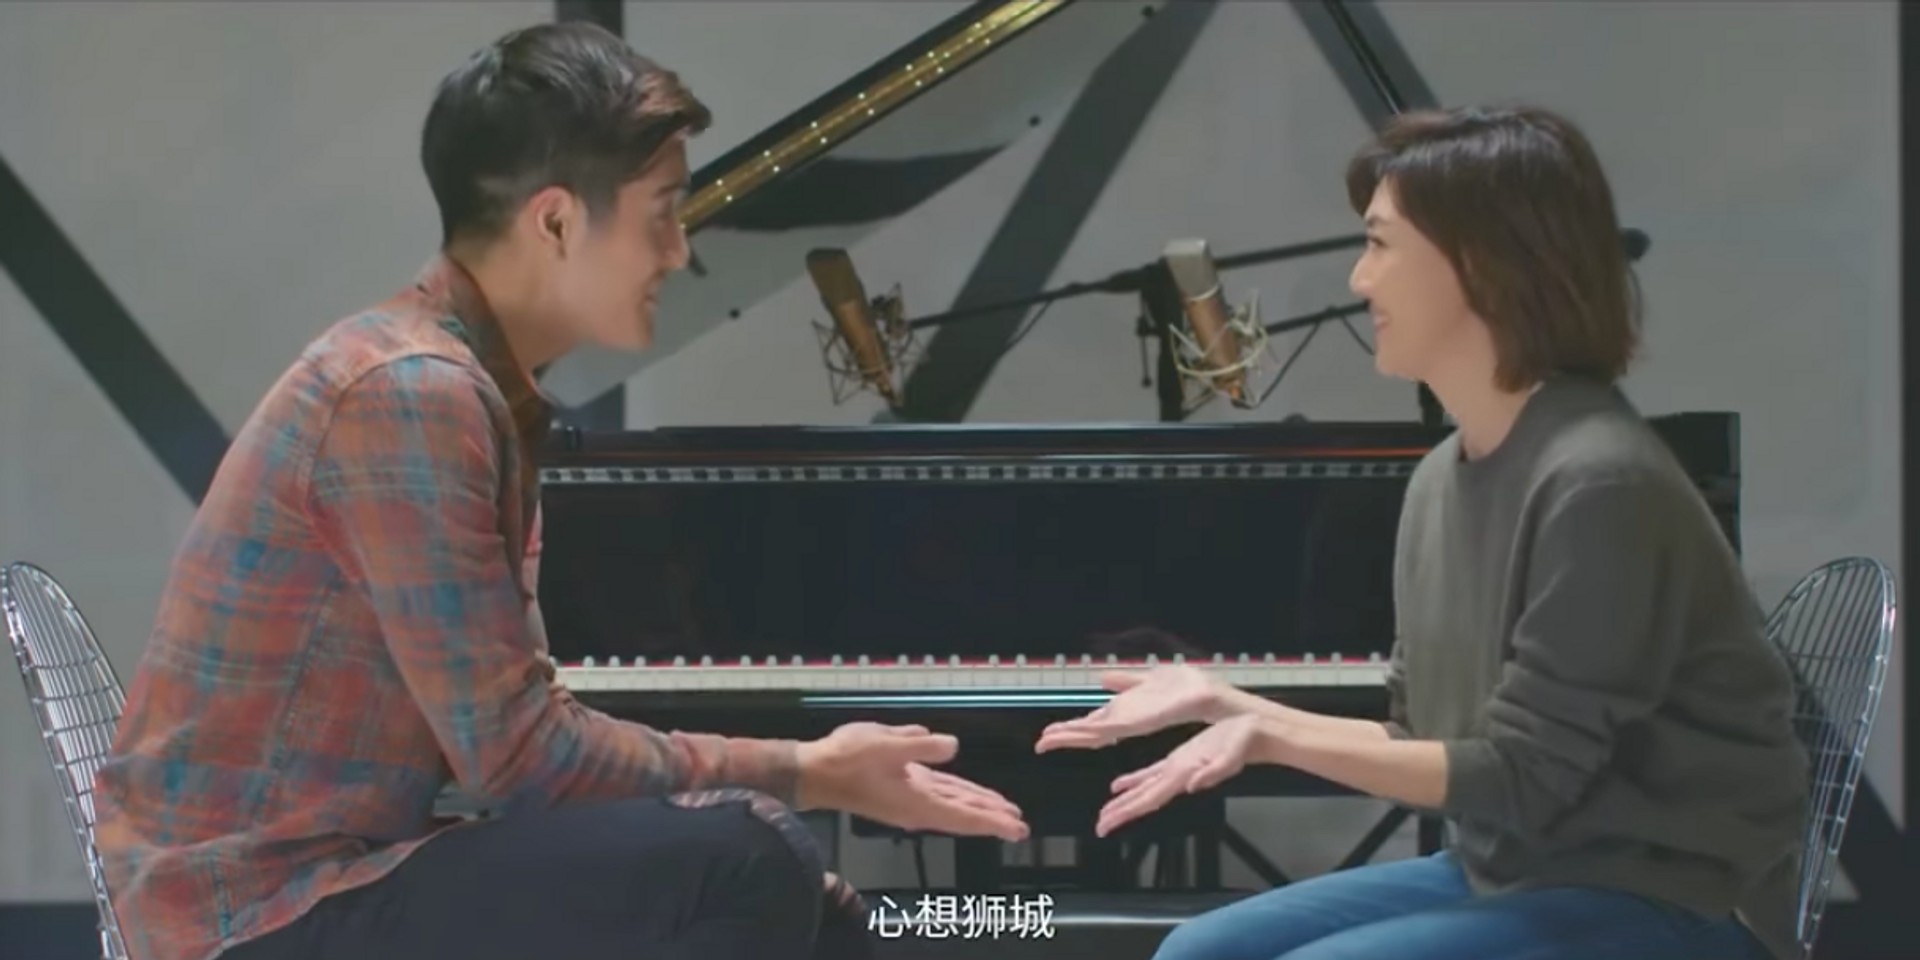 Stefanie Sun and Nathan Hartono get together in this promotional video (and it's glorious) — watch